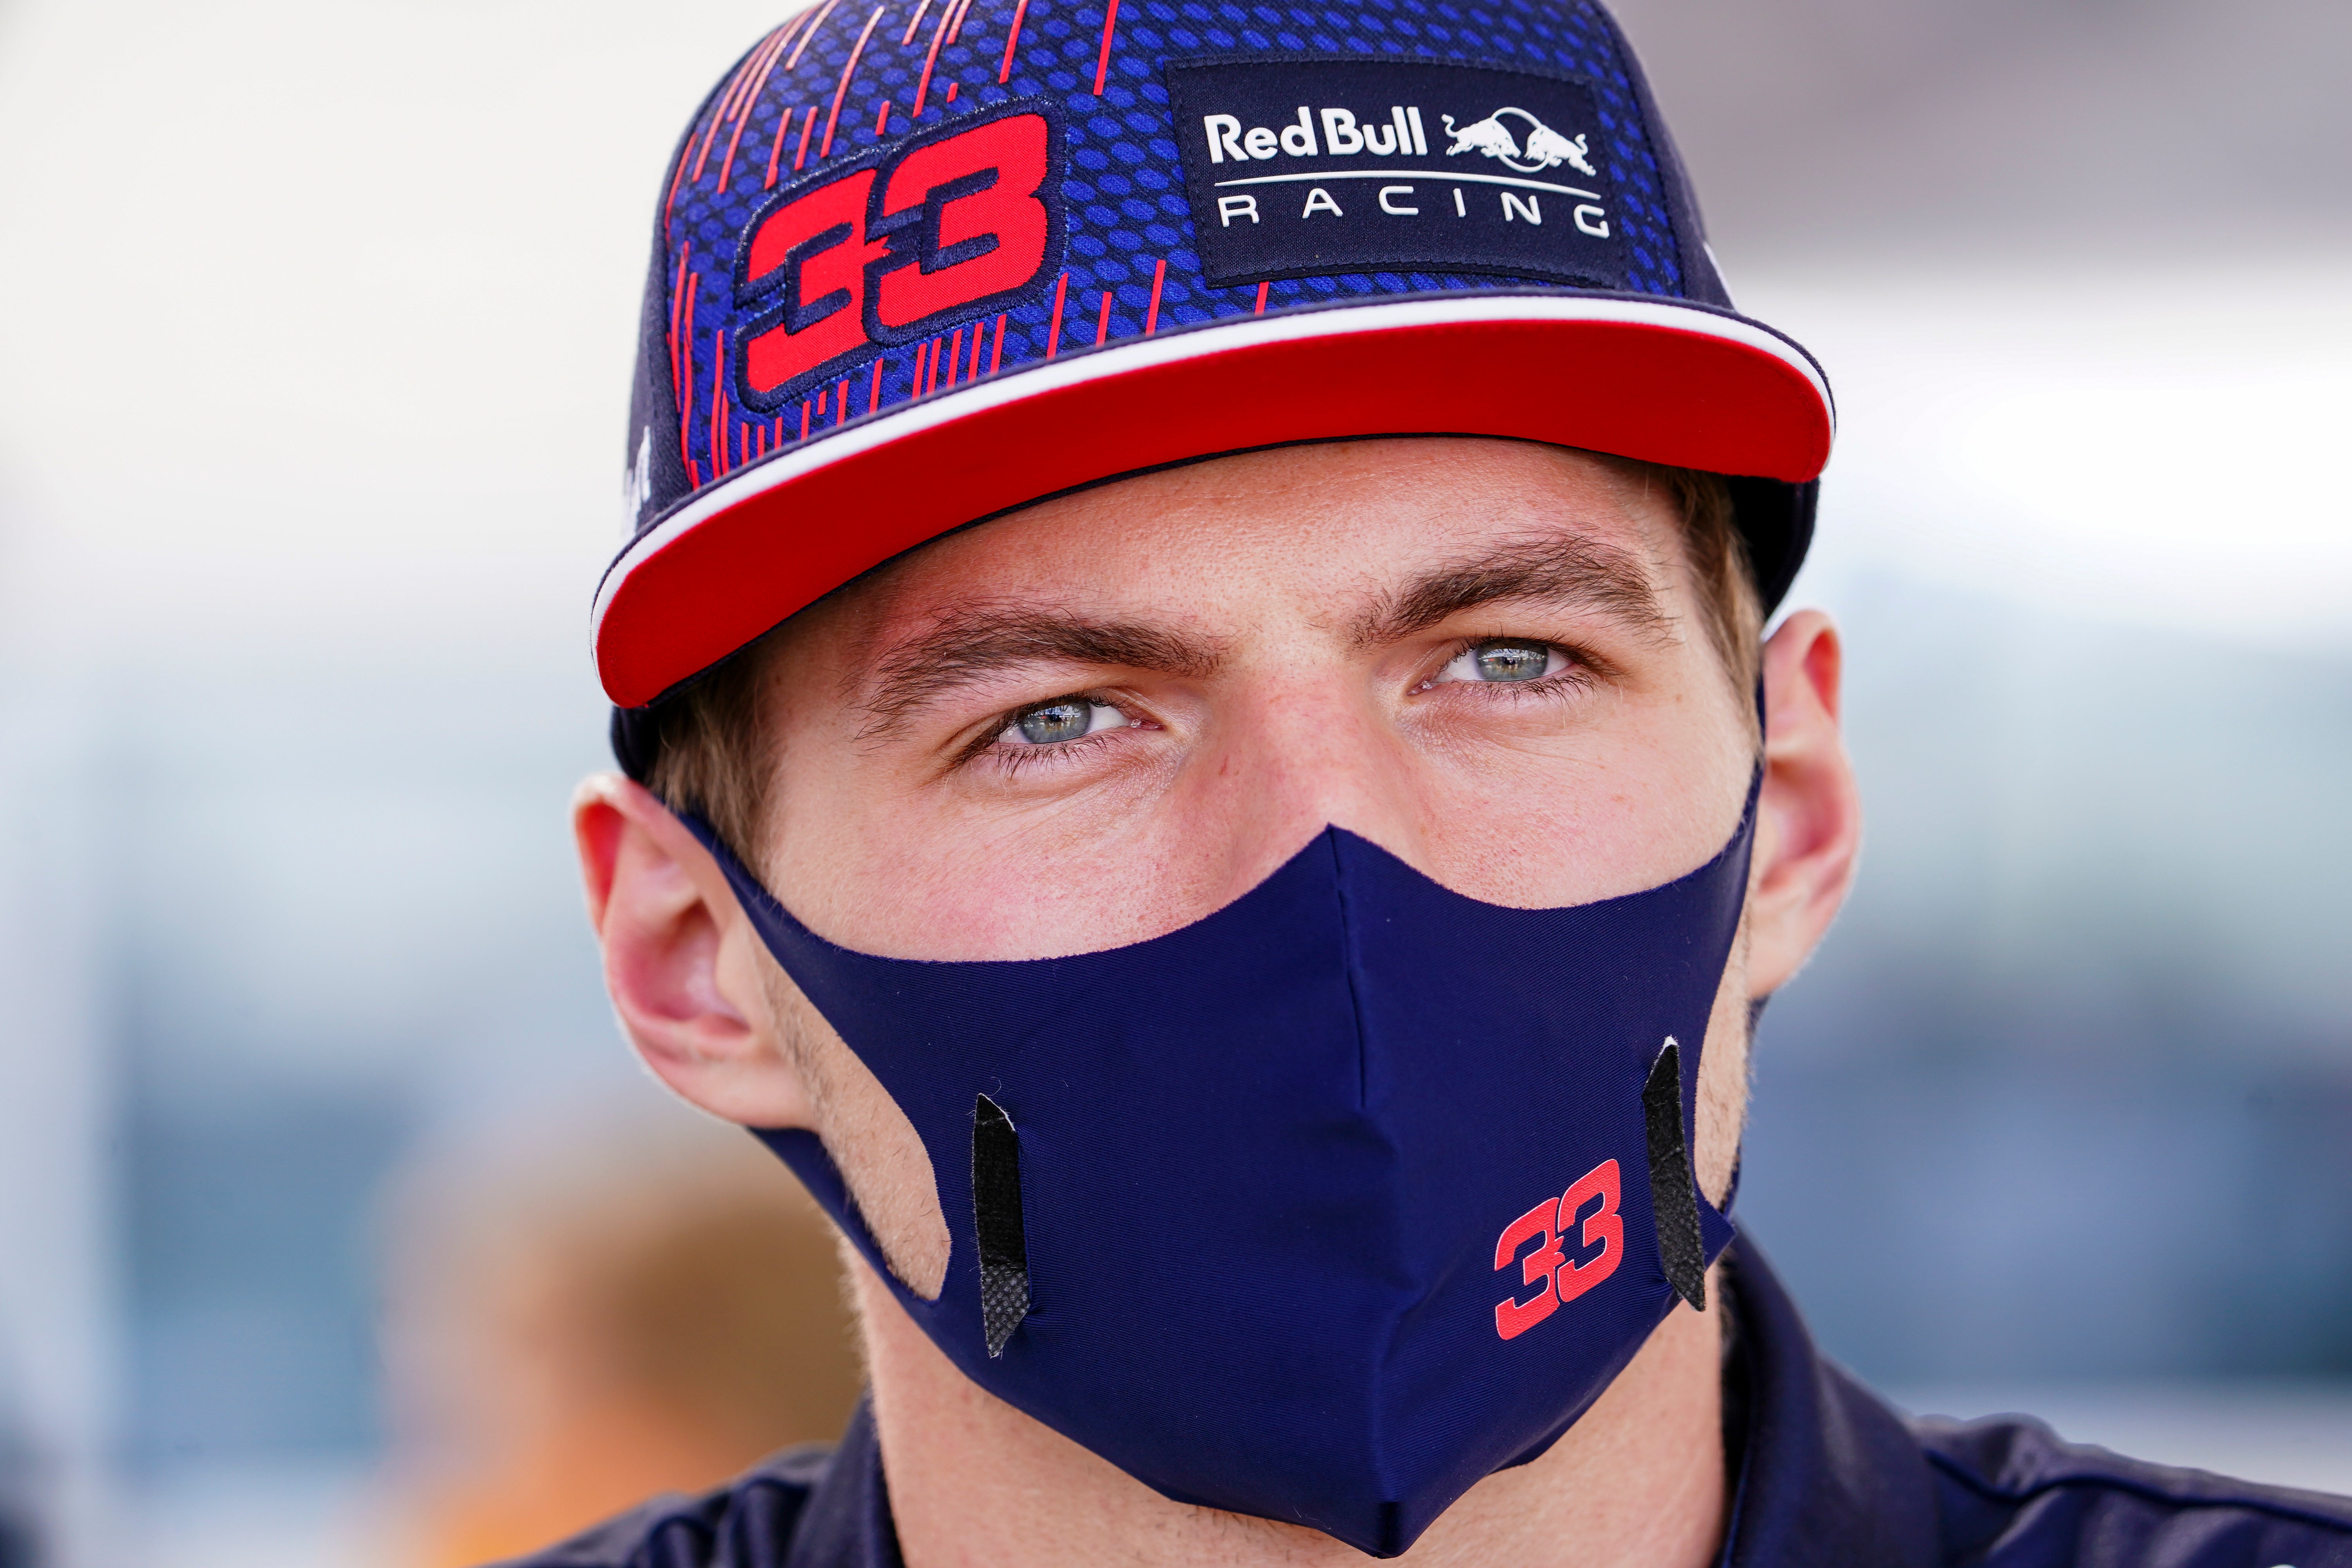 Max Verstappen is locked in a title battle with Lewis Hamilton